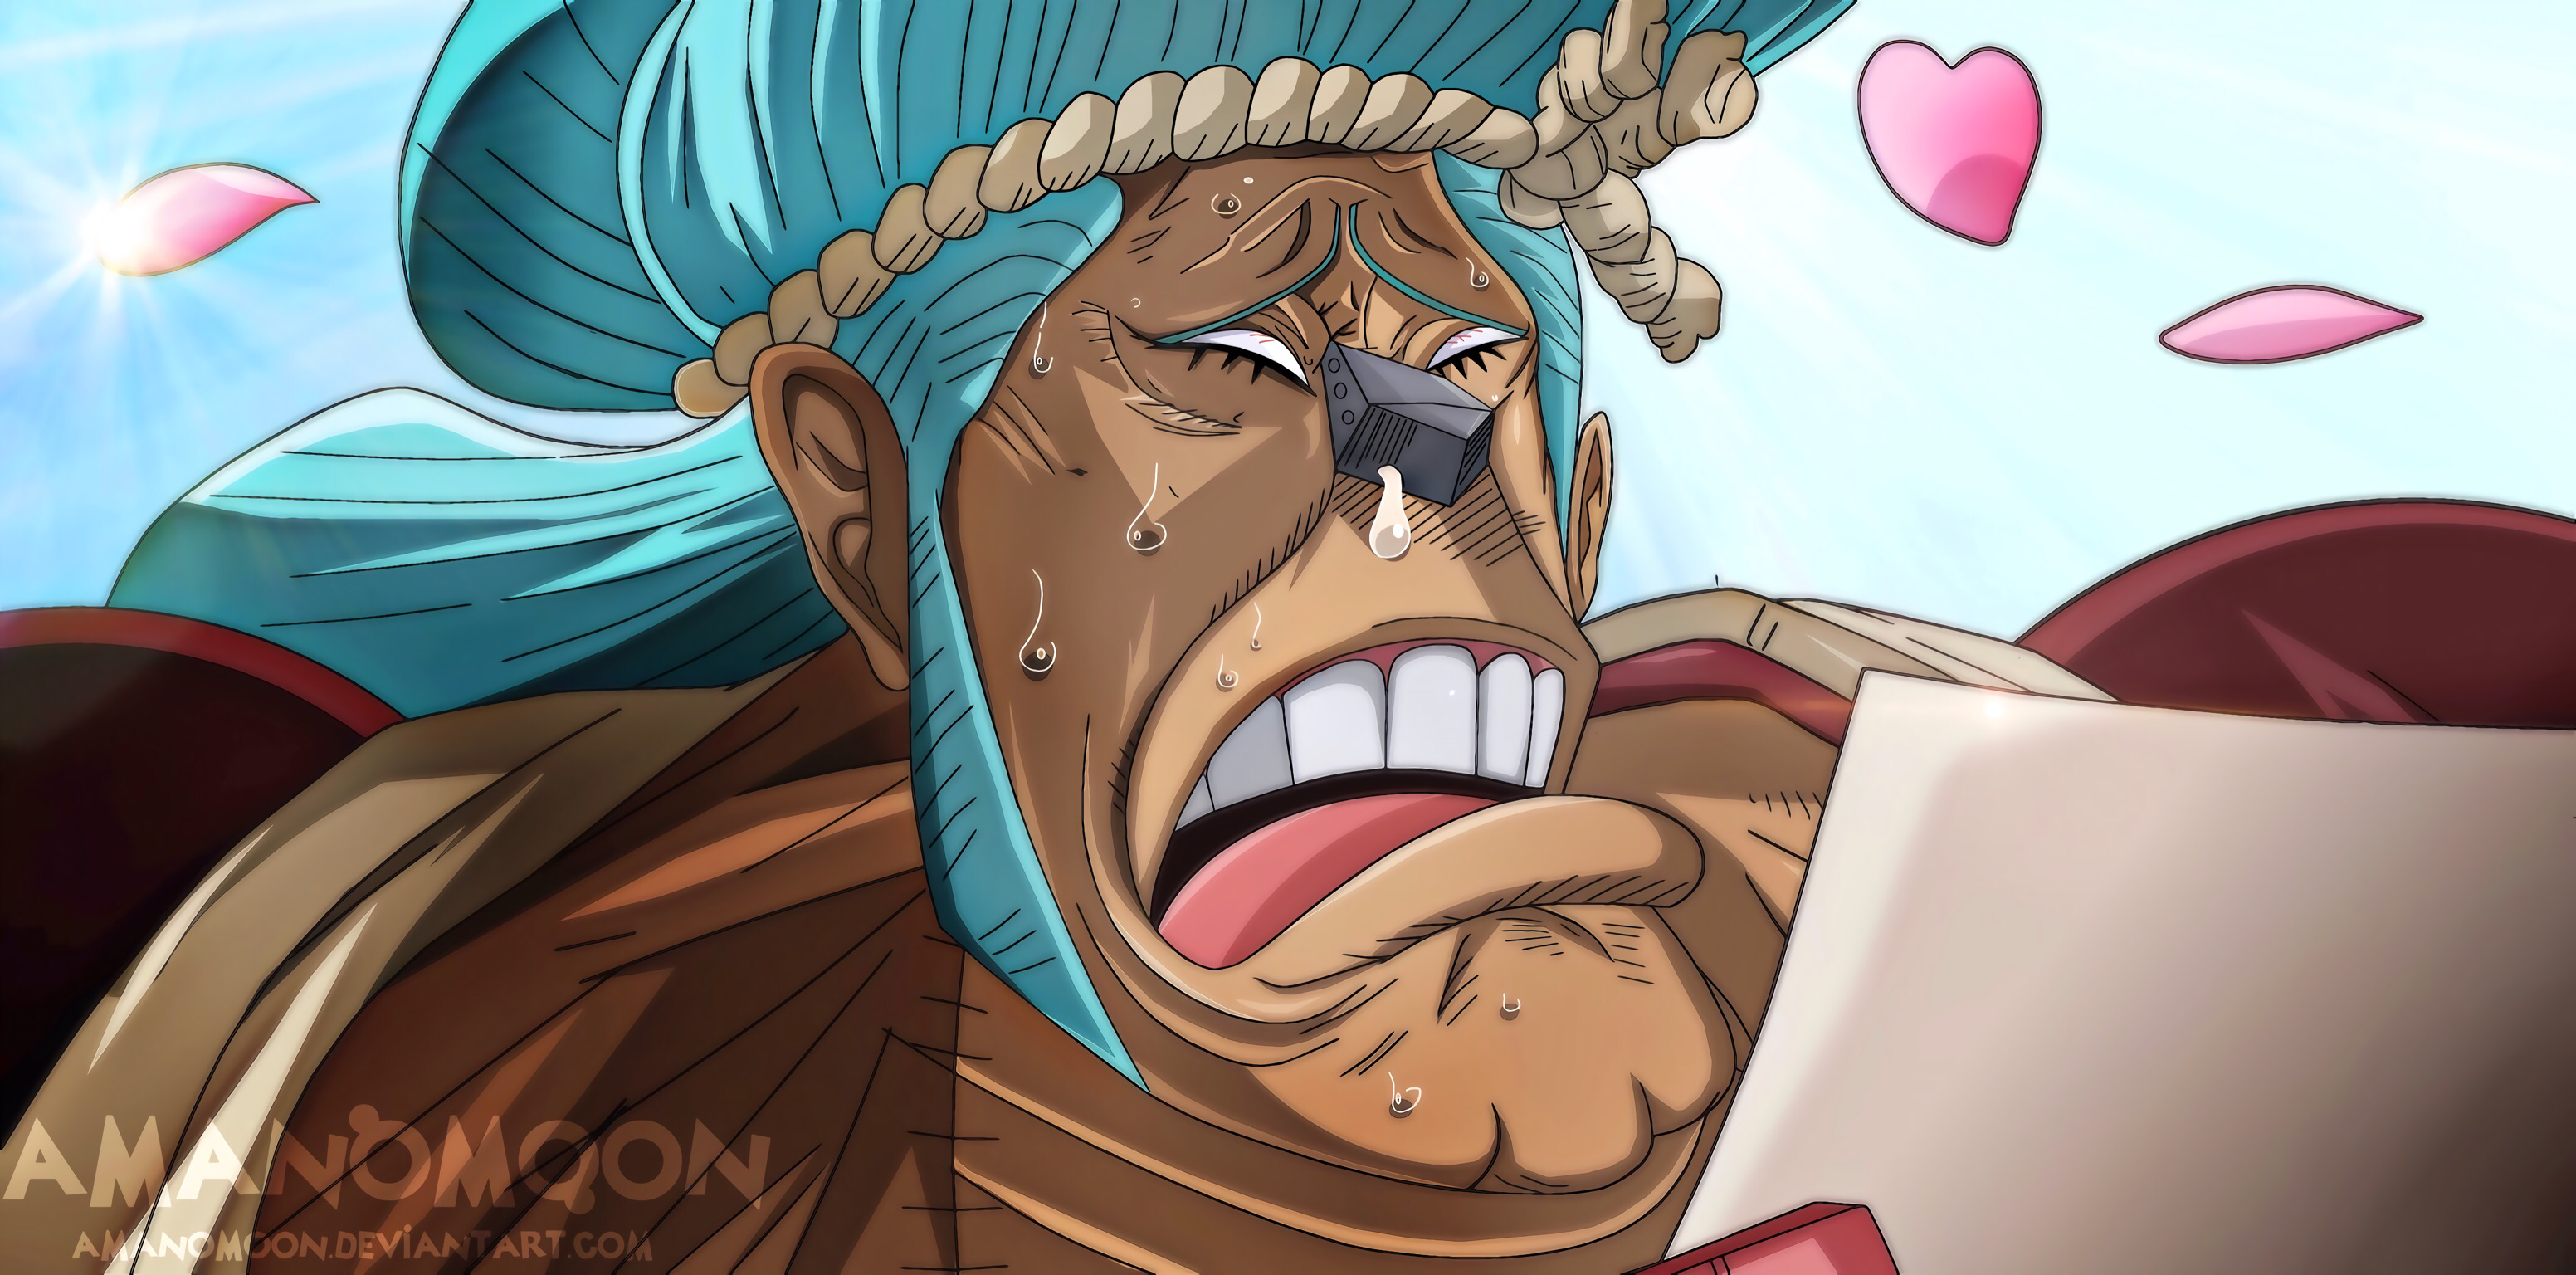 Franky One Piece Wallpapers - Wallpaper Cave